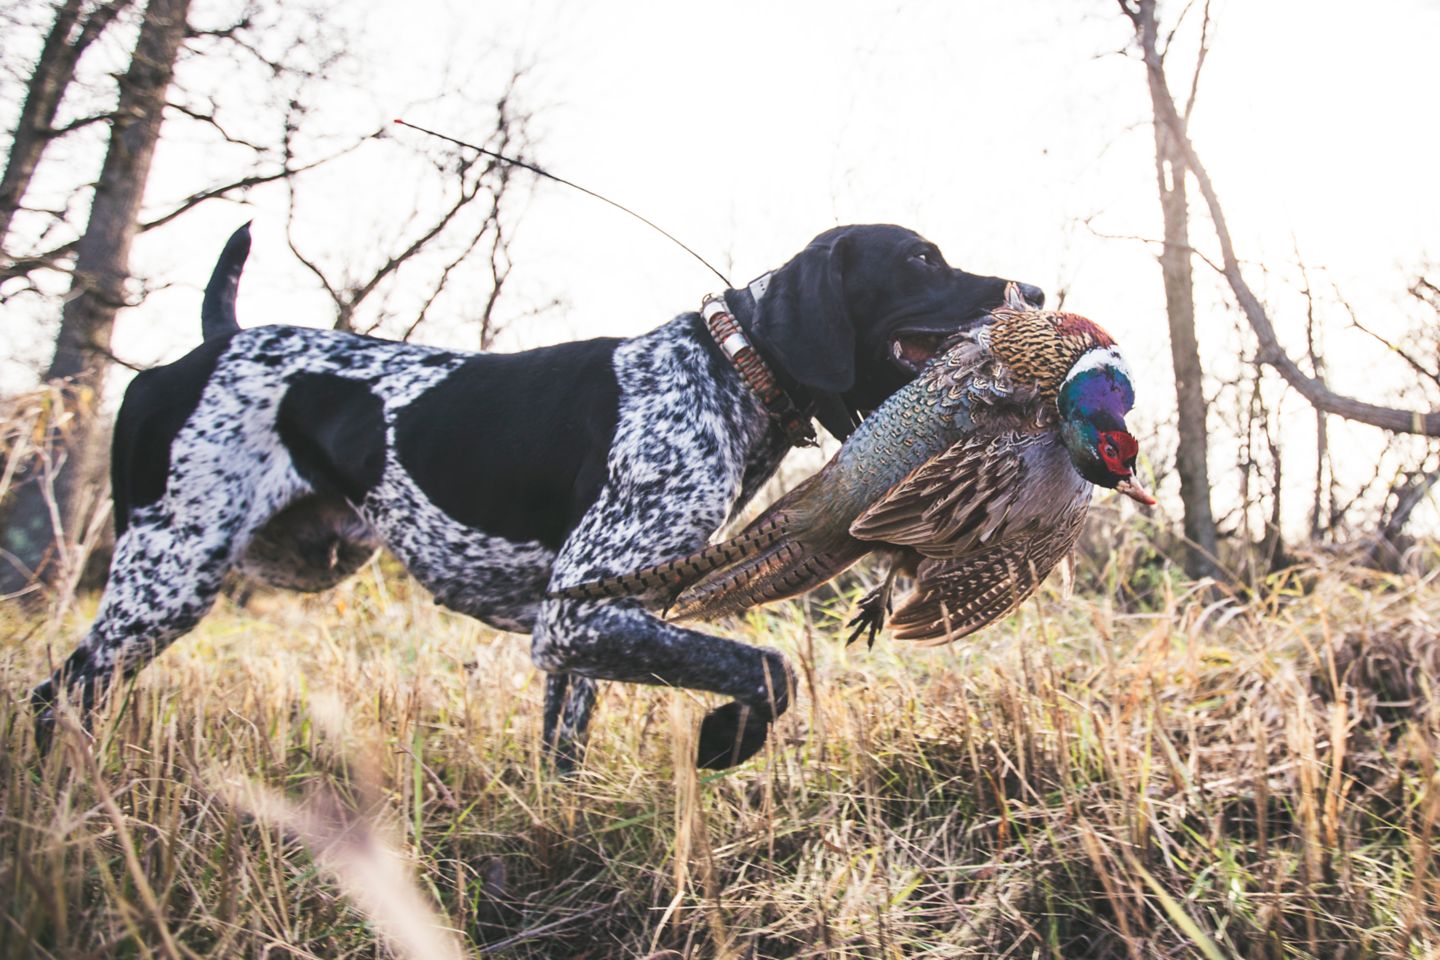 A black and white spotted hunting dog holds a pheasant as prey as it walks in a field in the fall